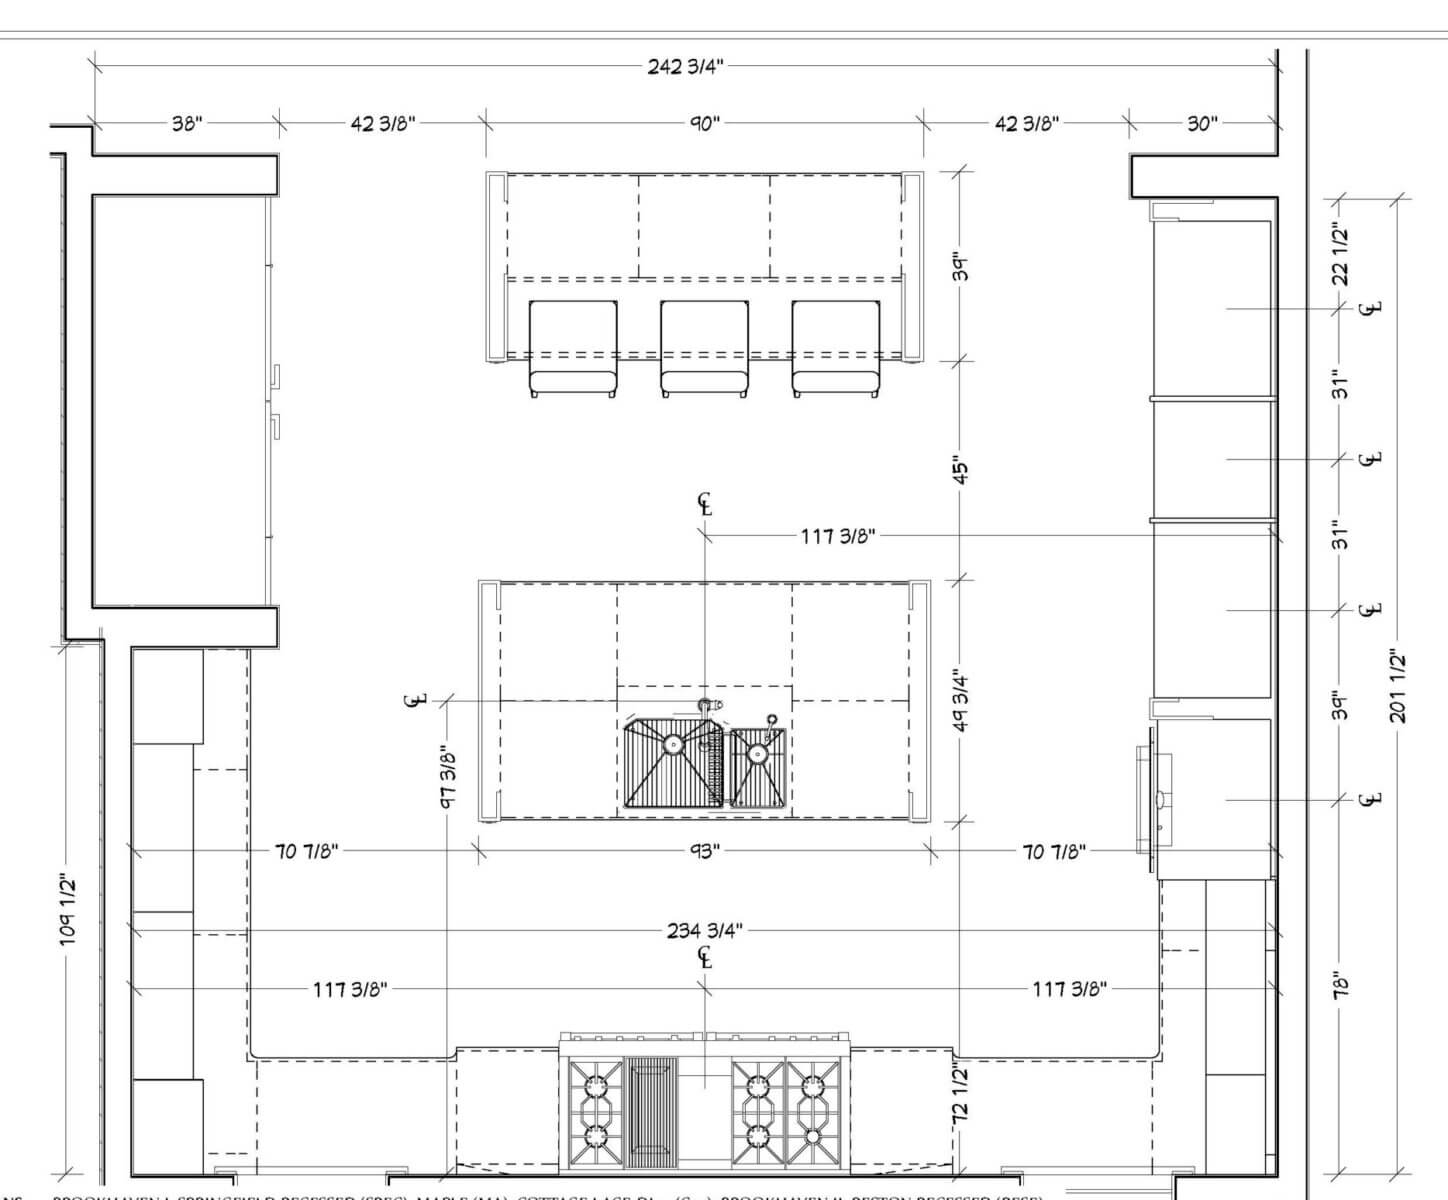 Blueprint of a kitchen layout to scale